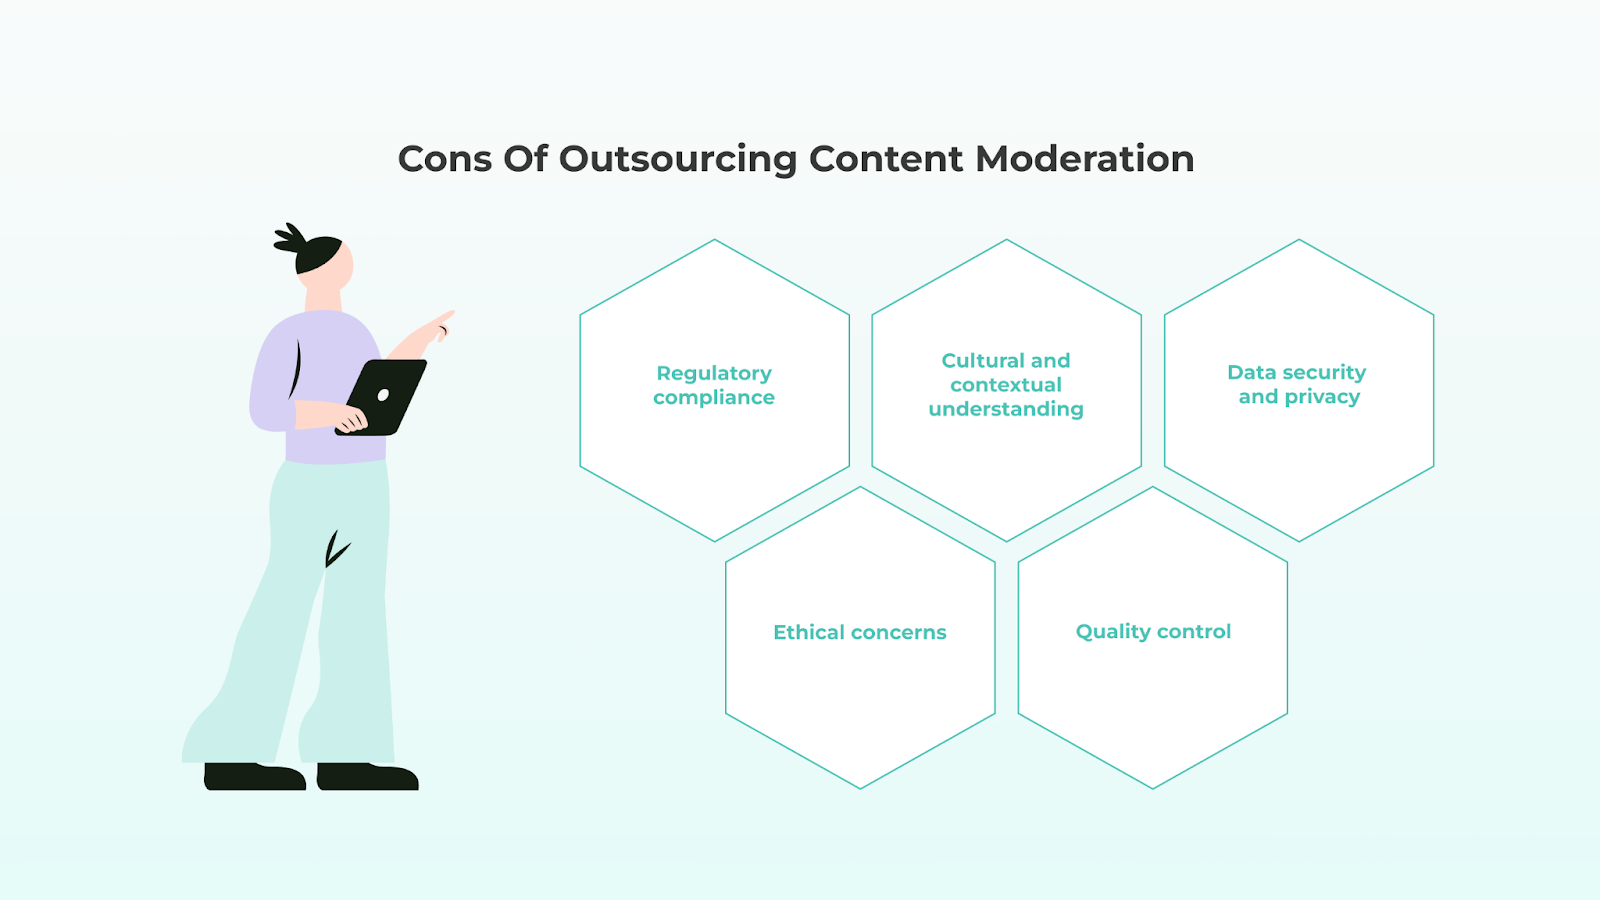 Cons of Outsourcing Content Moderation